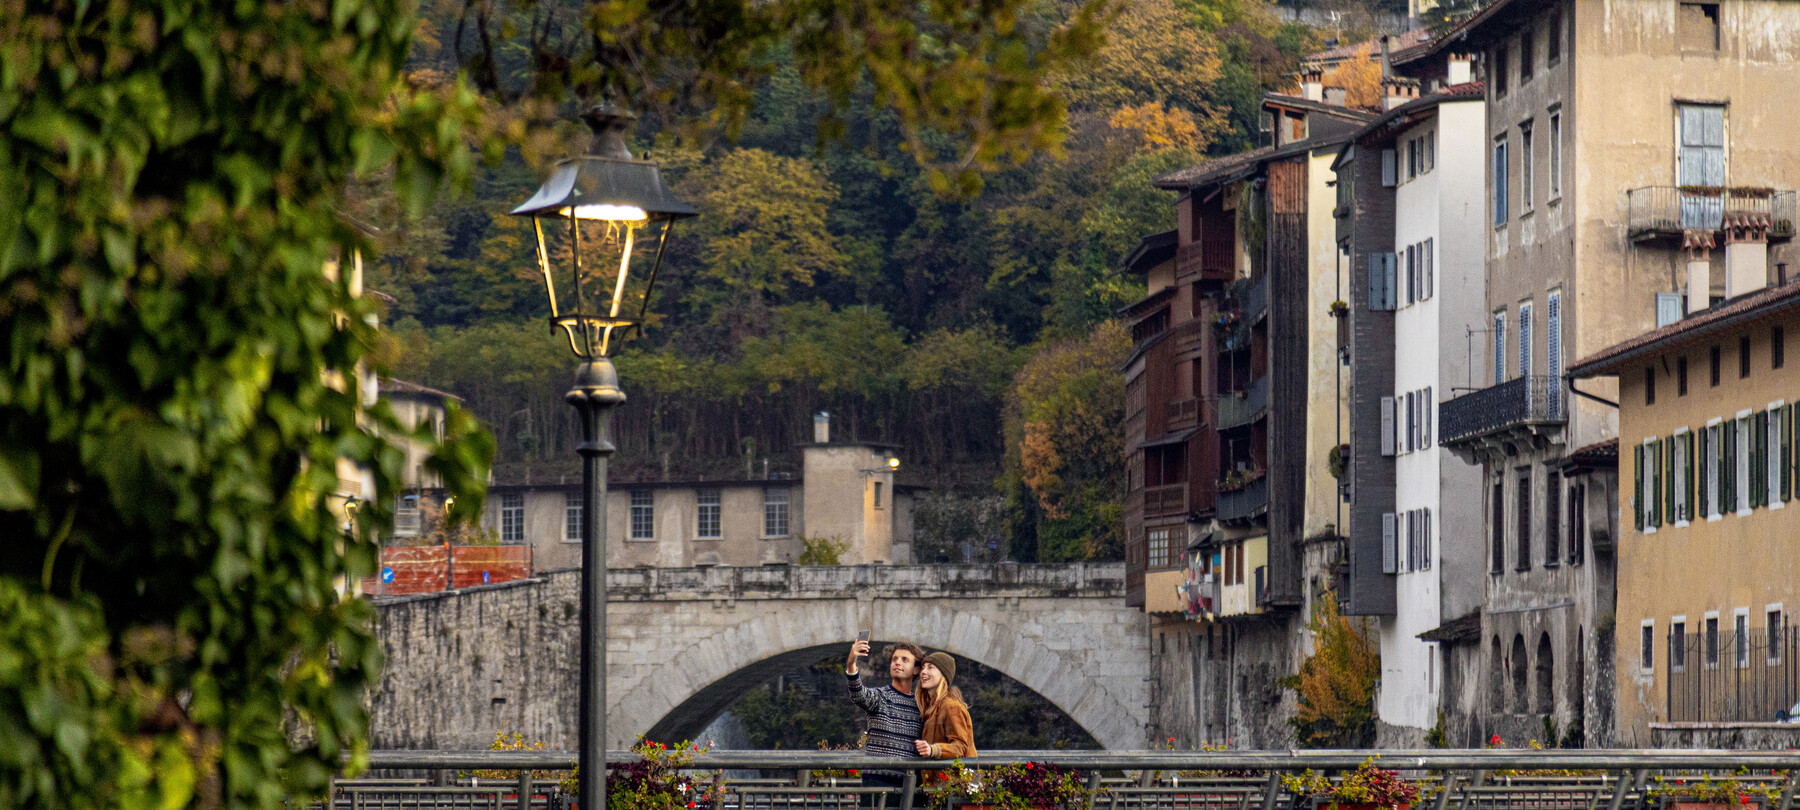 Two days in Trentino: to Rovereto, where you can appreciate fine art and gourmet cuisine